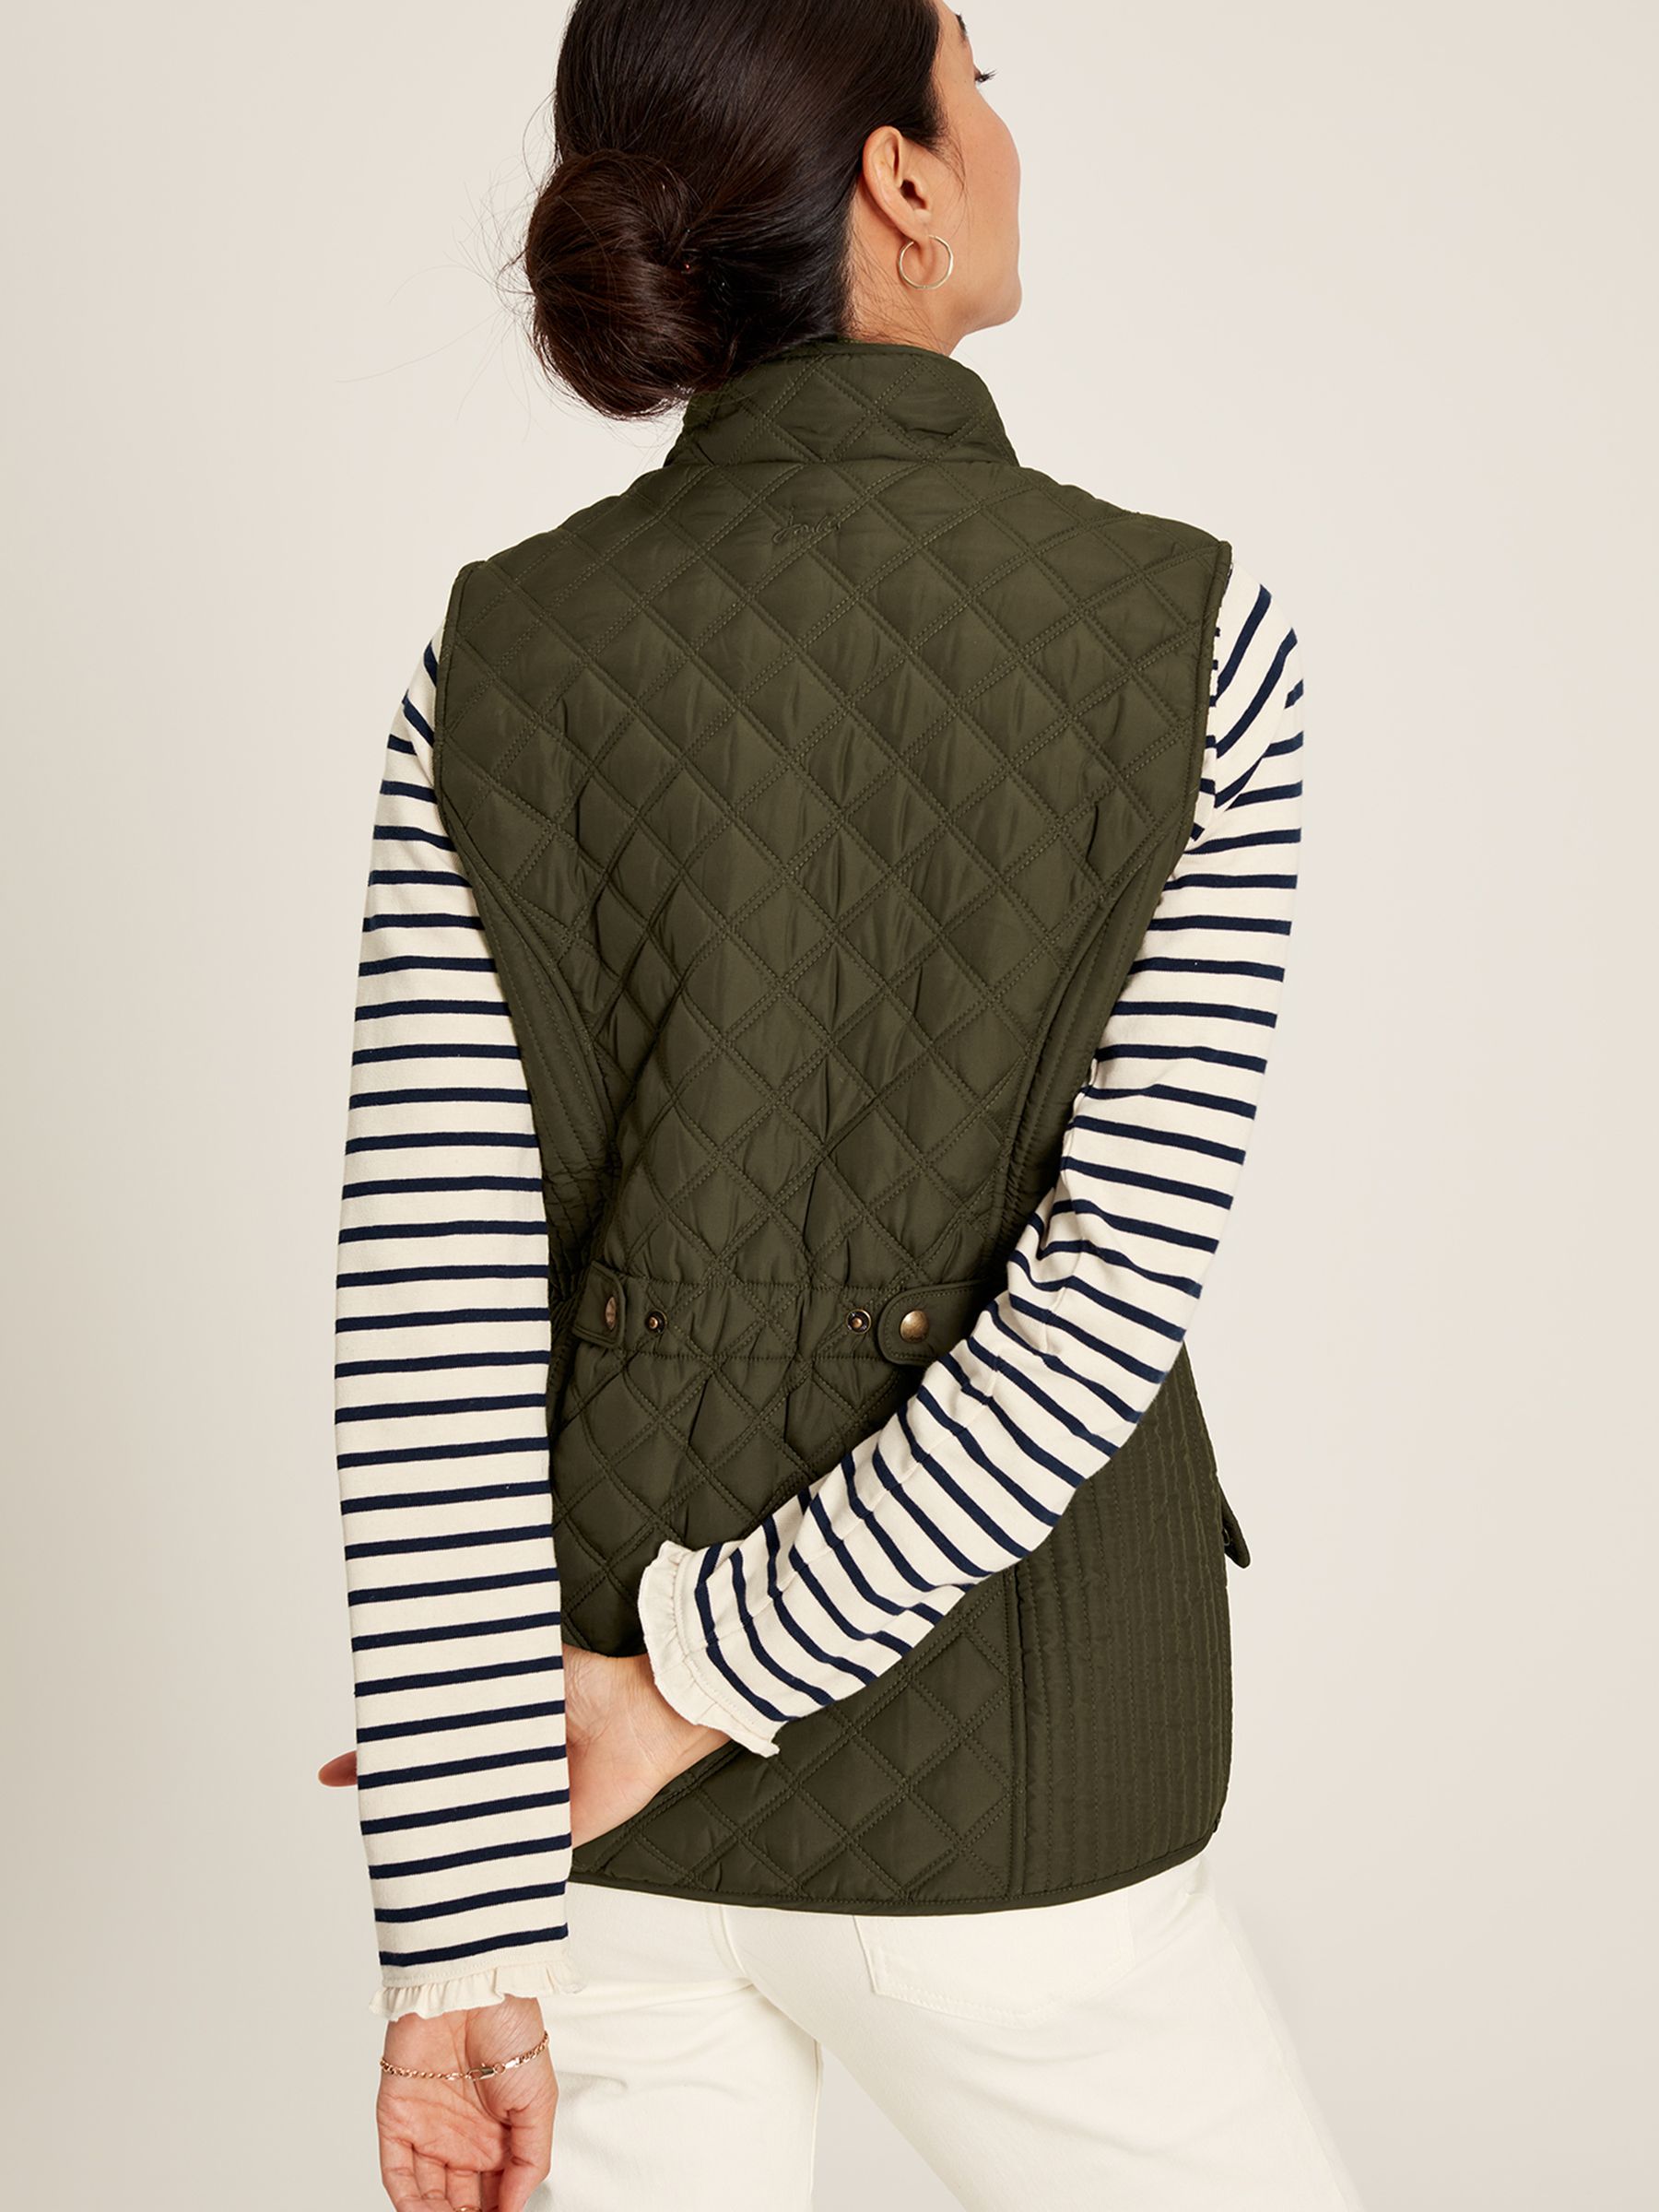 Buy Joules Minx Showerproof Diamond Quilted Gilet from the Joules ...